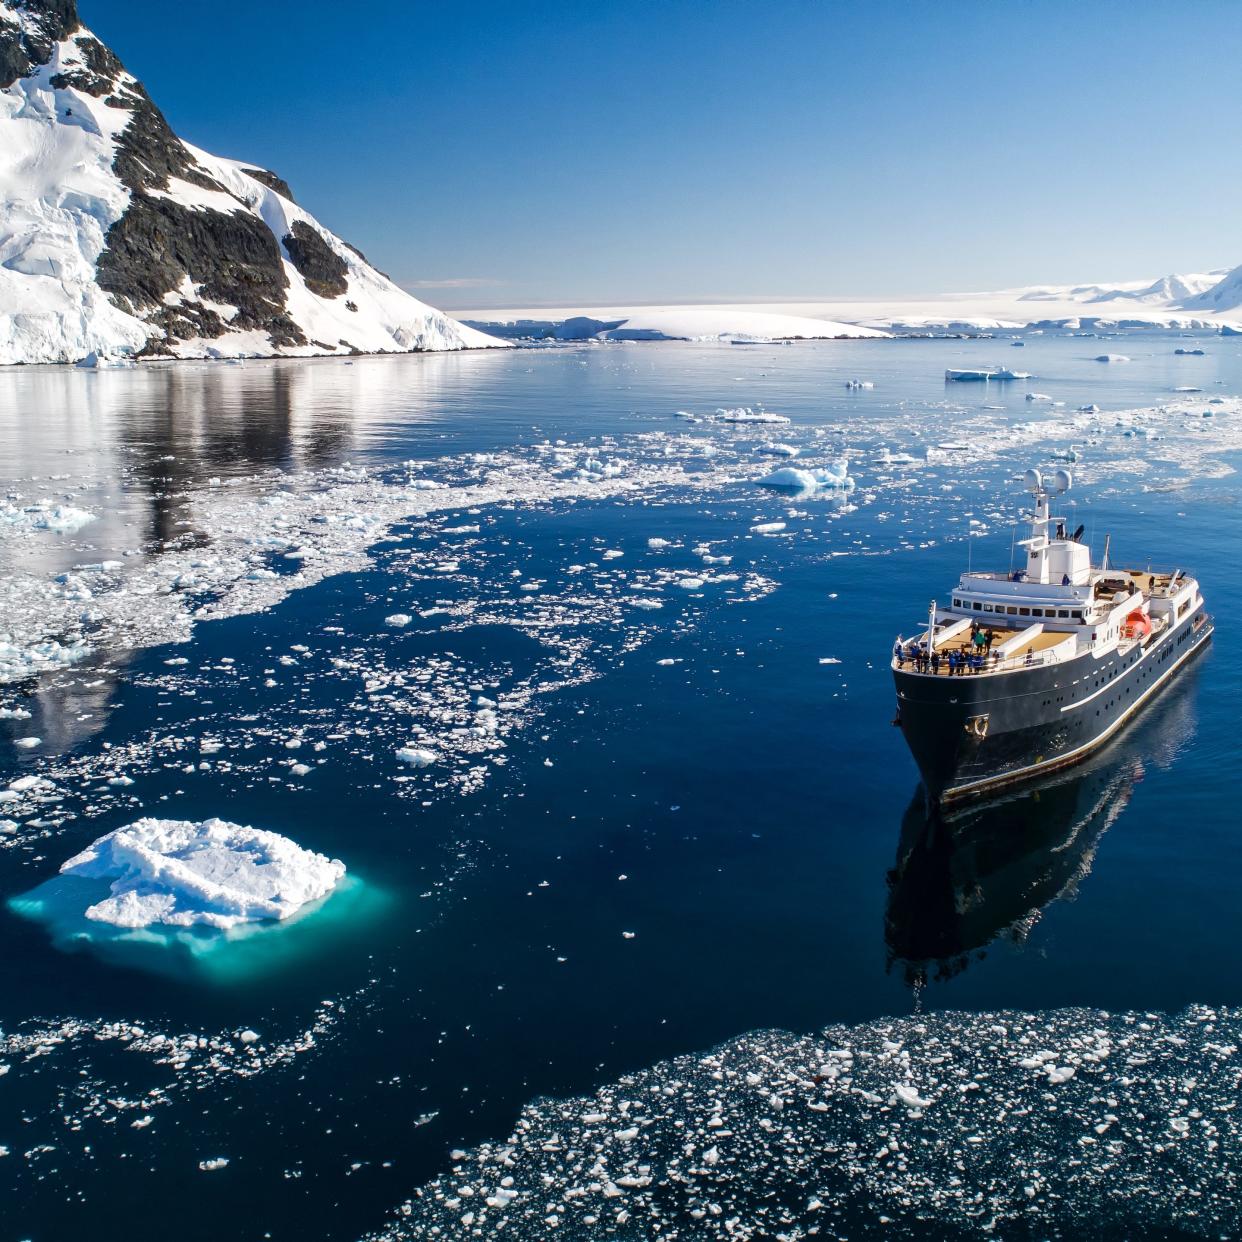 The trip of a lifetime: sailing in Antarctica aboard the superyacht Legend - Christopher Scholey